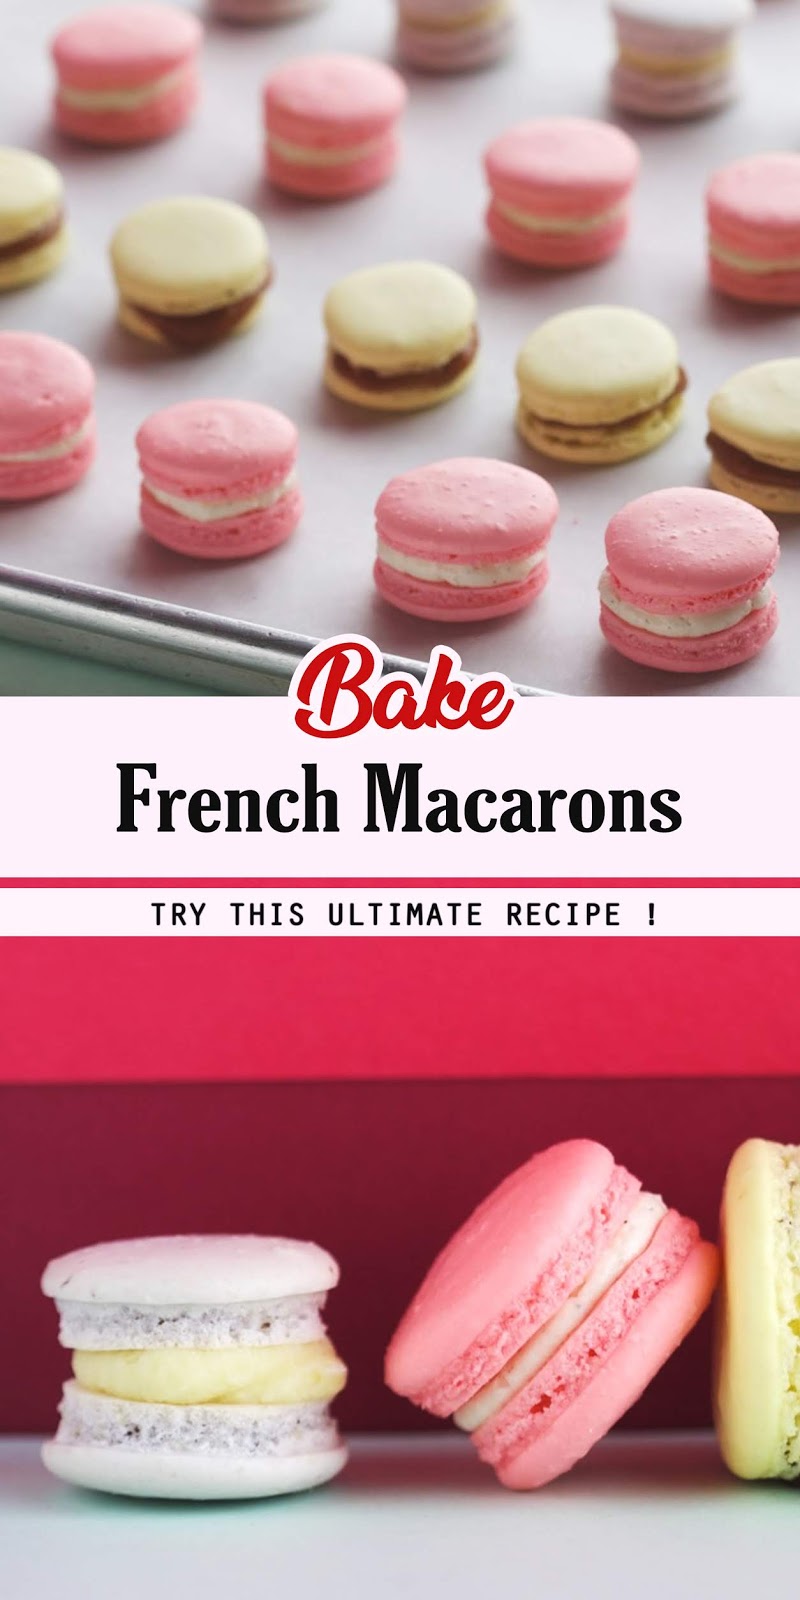 Bake French Macarons - 3 SECONDS